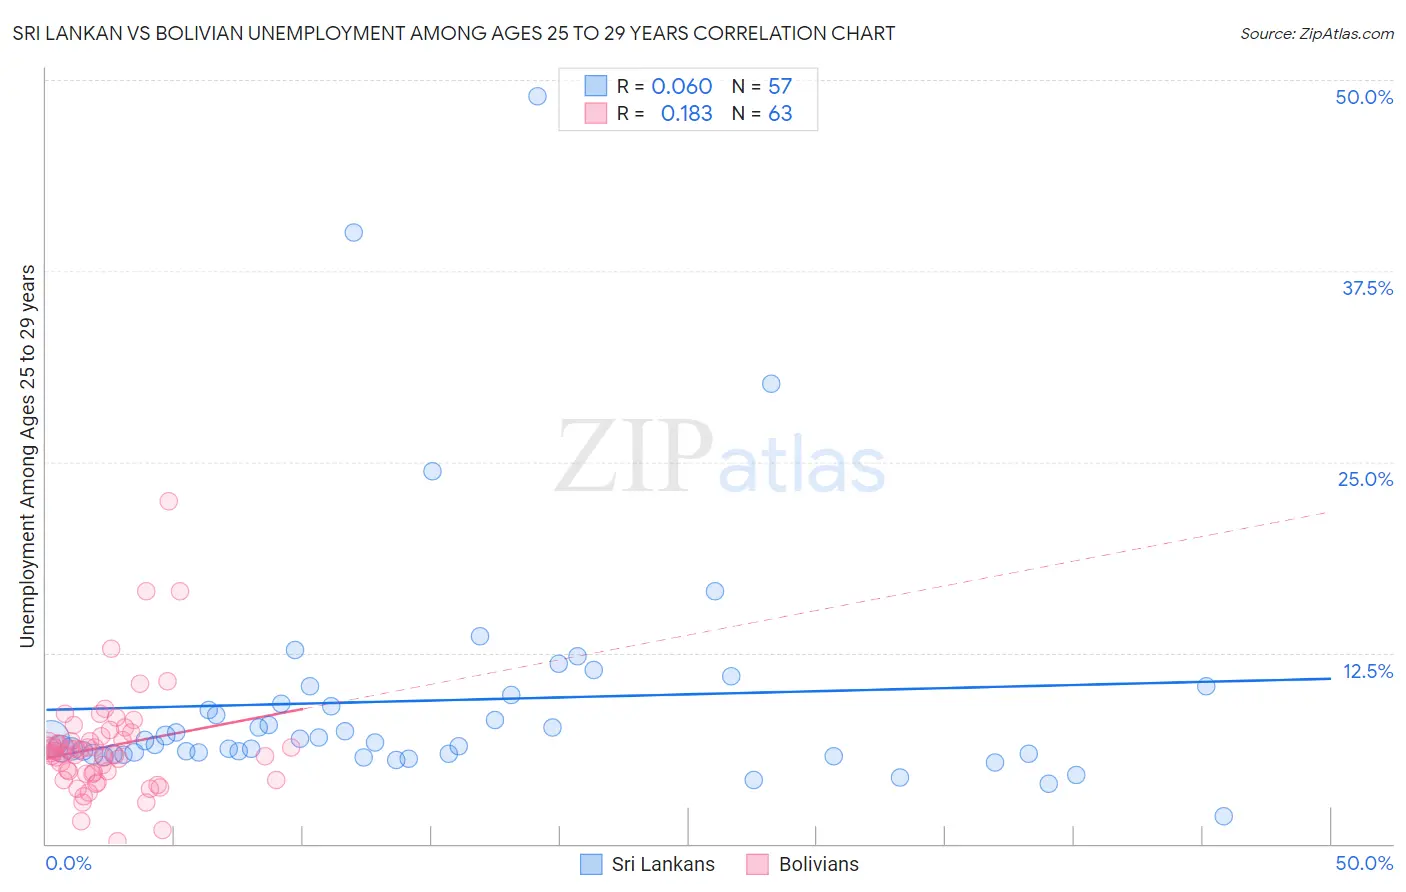 Sri Lankan vs Bolivian Unemployment Among Ages 25 to 29 years